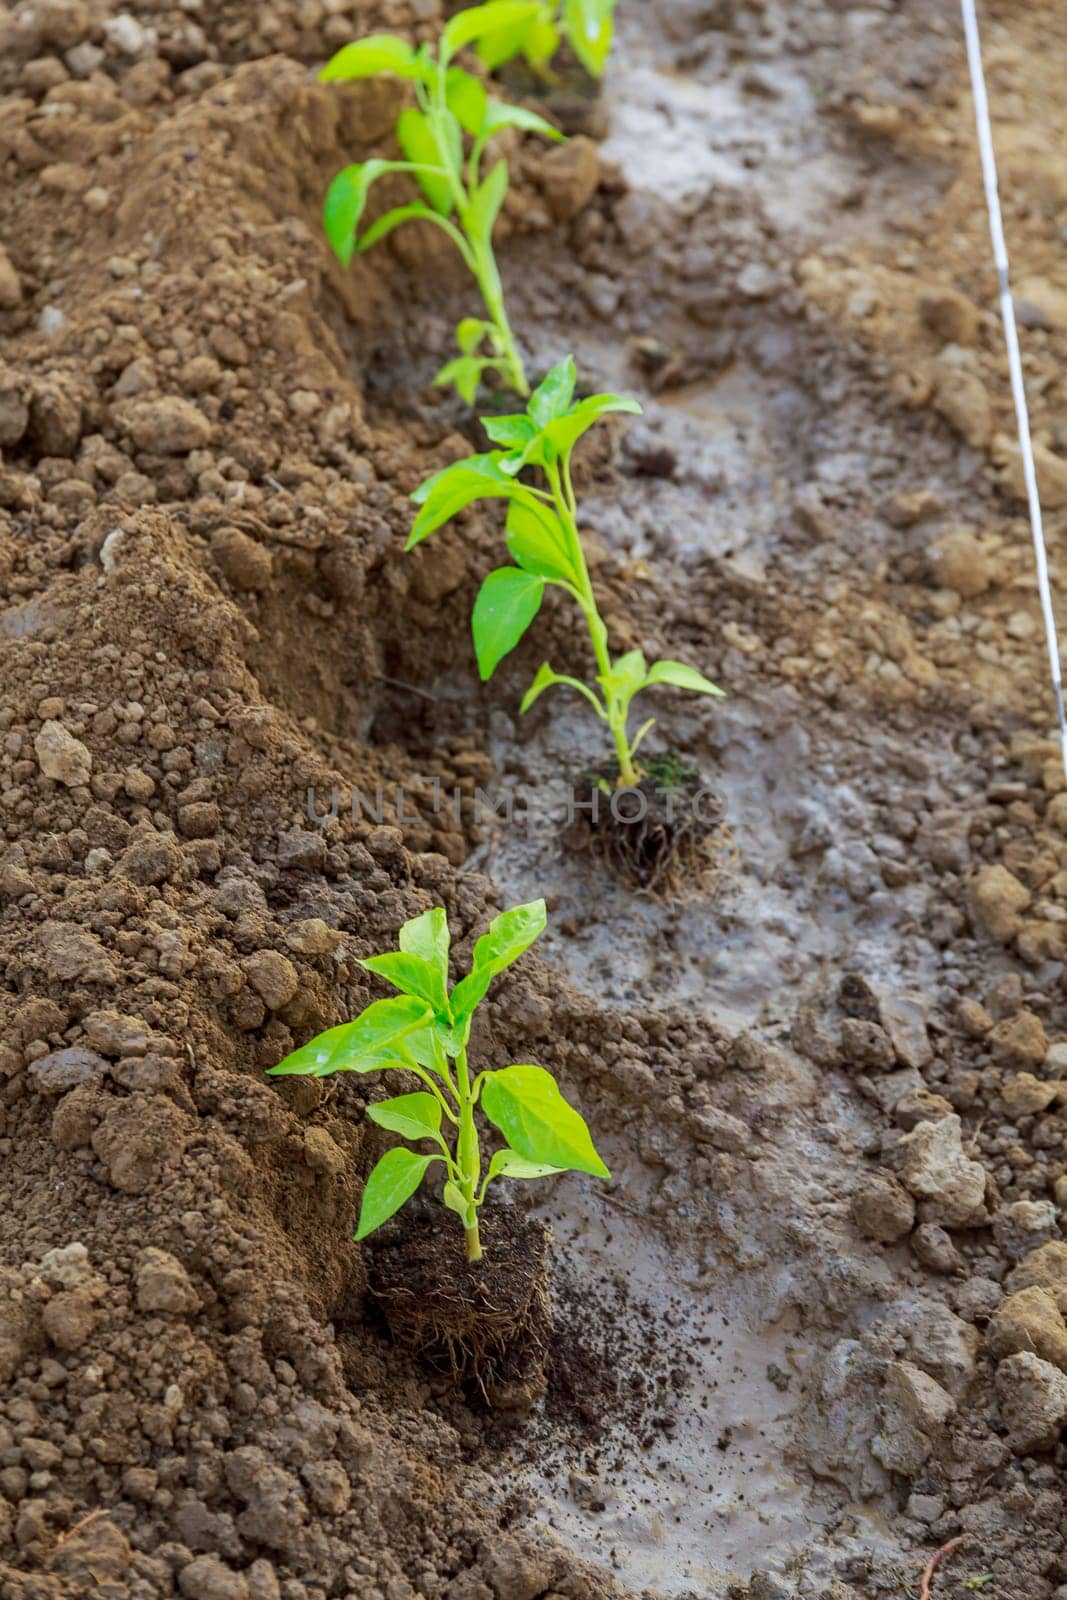 Watering is crucial when planting pepper seedlings to help establish strong roots.